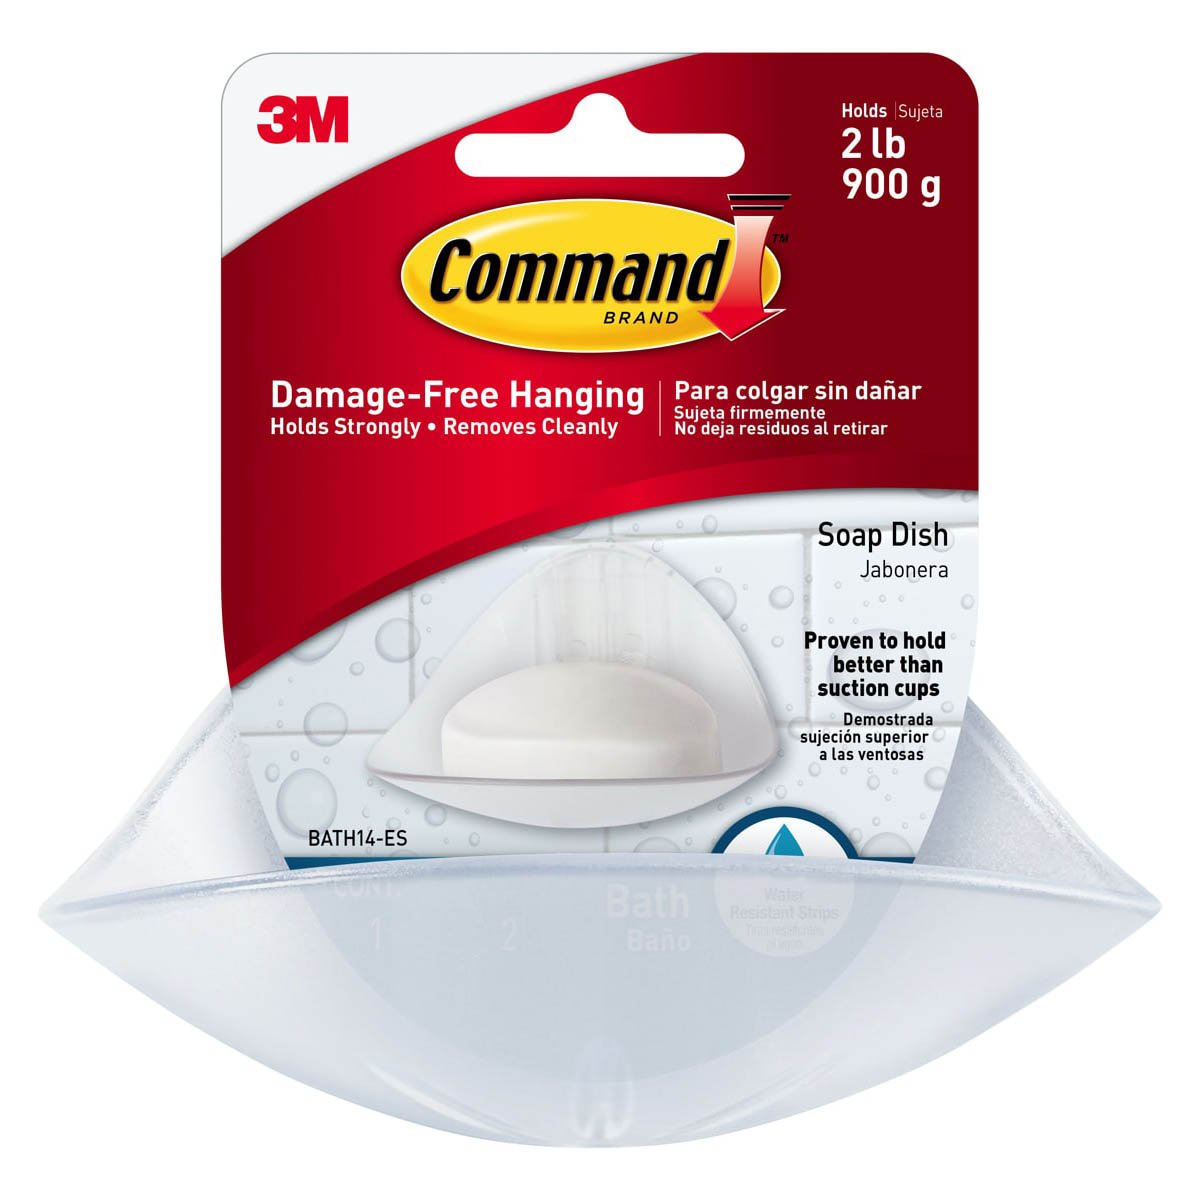 3M COMMAND CORNER CADDY 4 LARGE STRIPS / 1 ALCOHOL WIPE / 3 KG